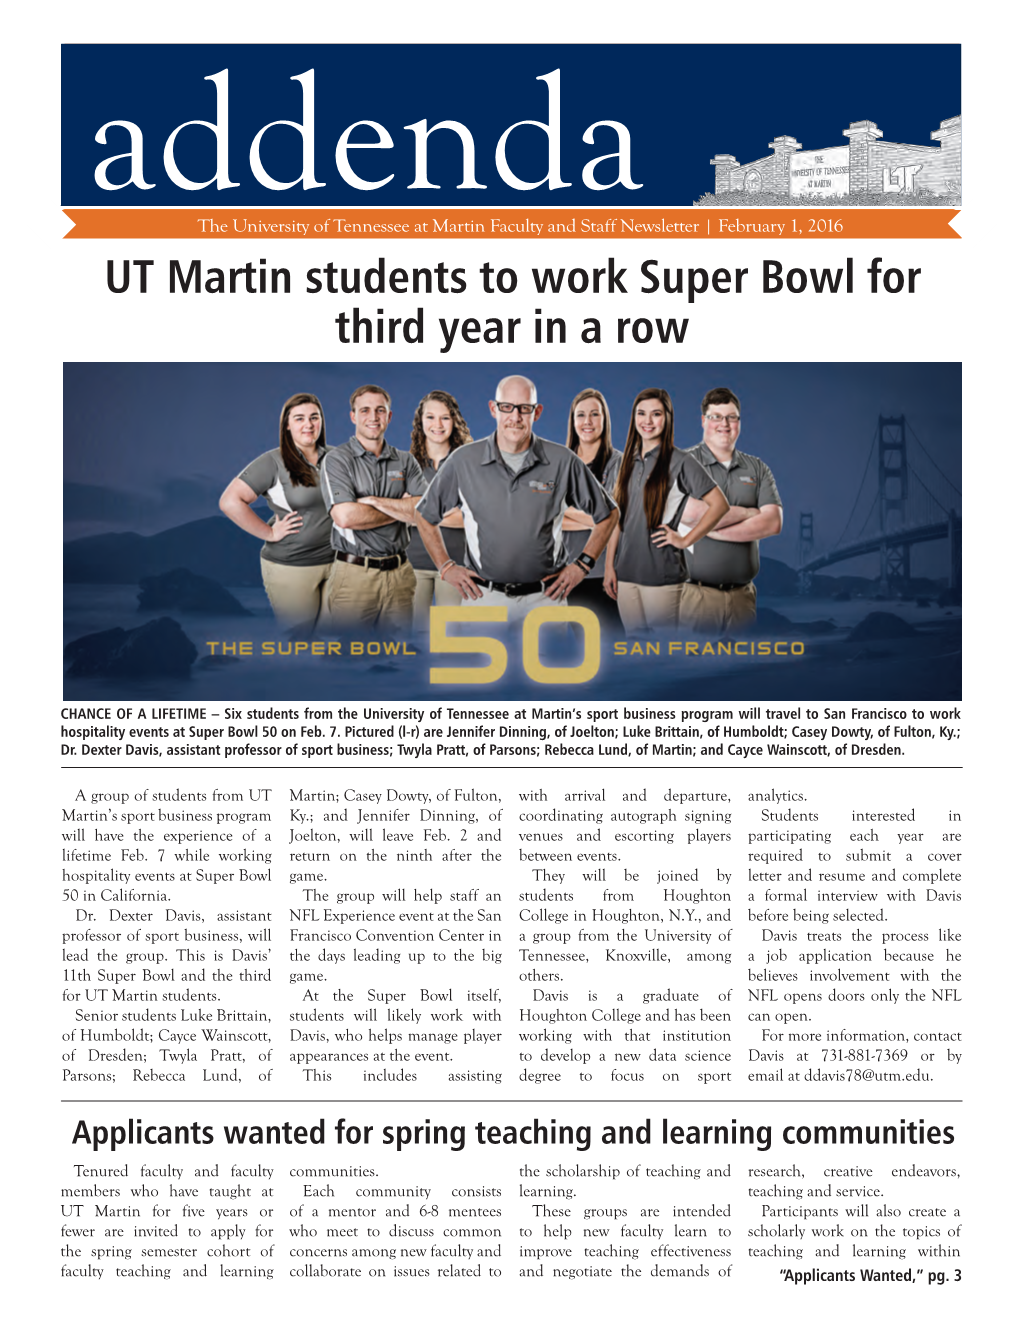 UT Martin Students to Work Super Bowl for Third Year in a Row